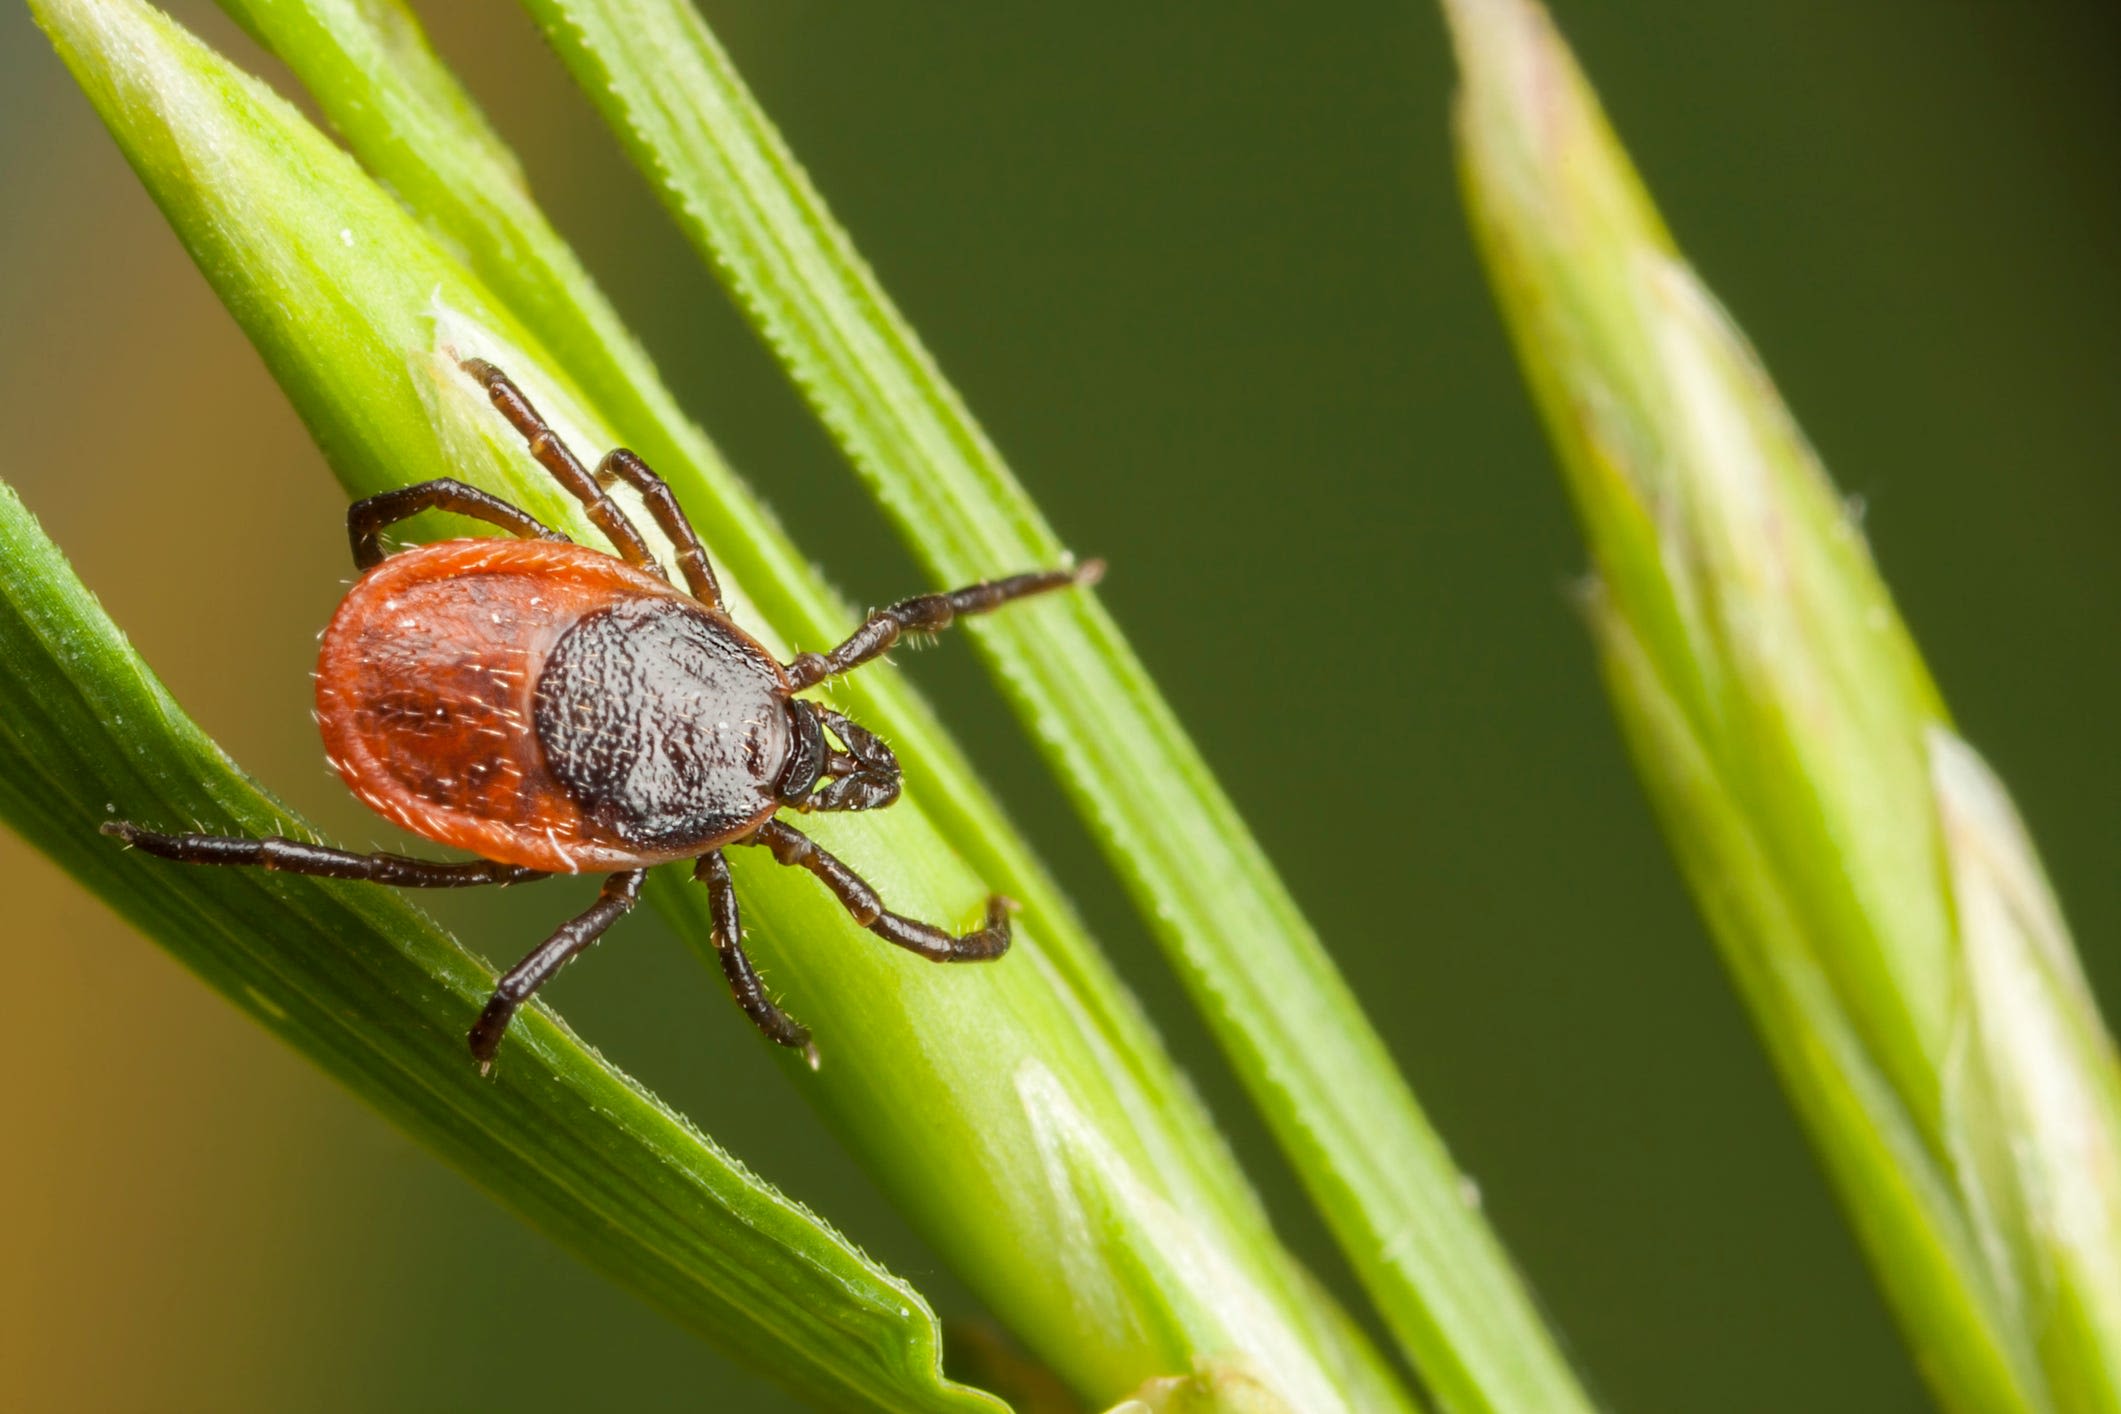 How to remove a tick: Here's what to do about a bite (for dogs and humans)